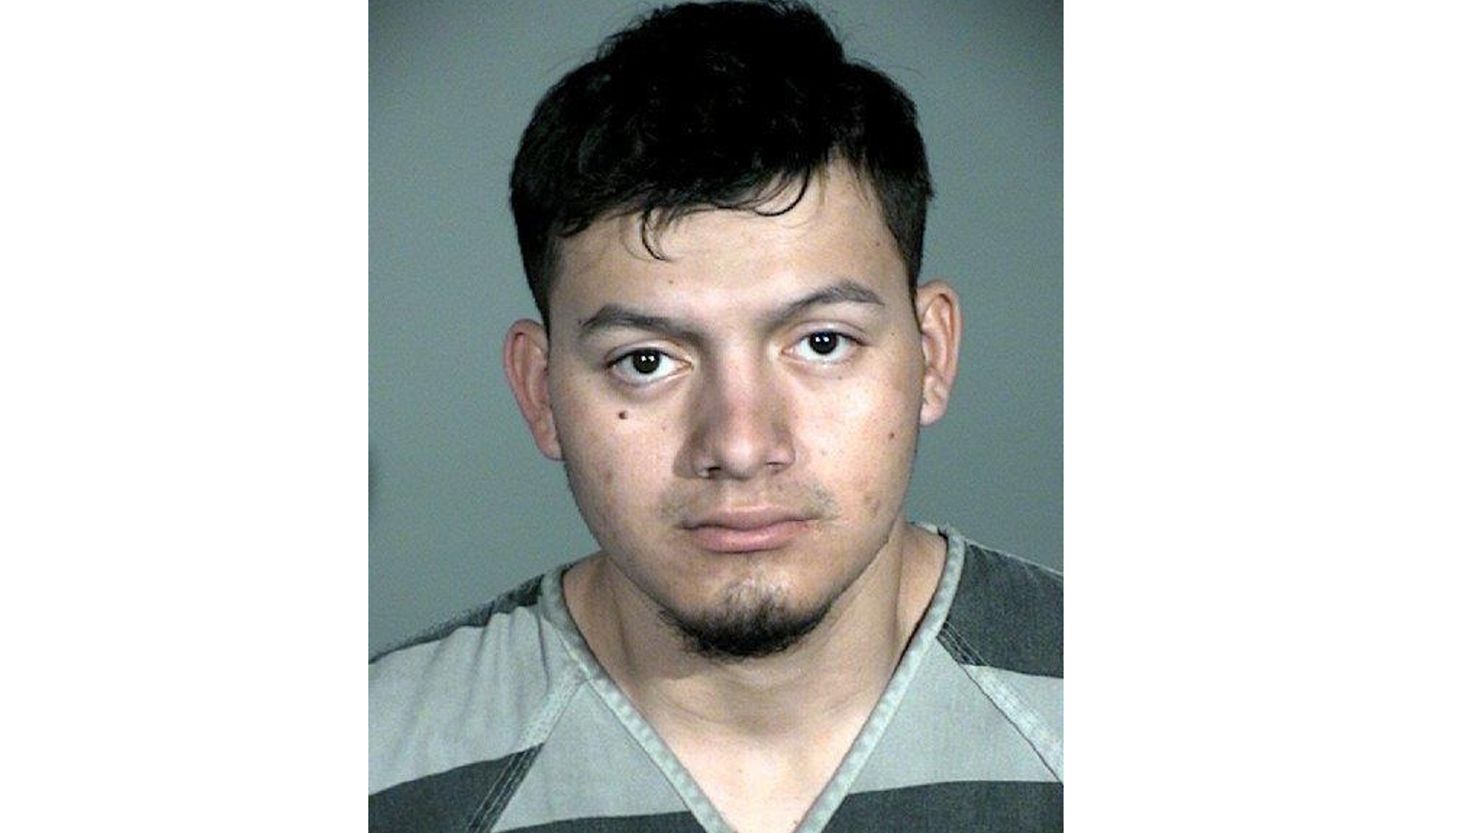 Wilber Ernesto Martinez-Guzman is seen in this undated photo provided by the Carson City Sheriff's Office.